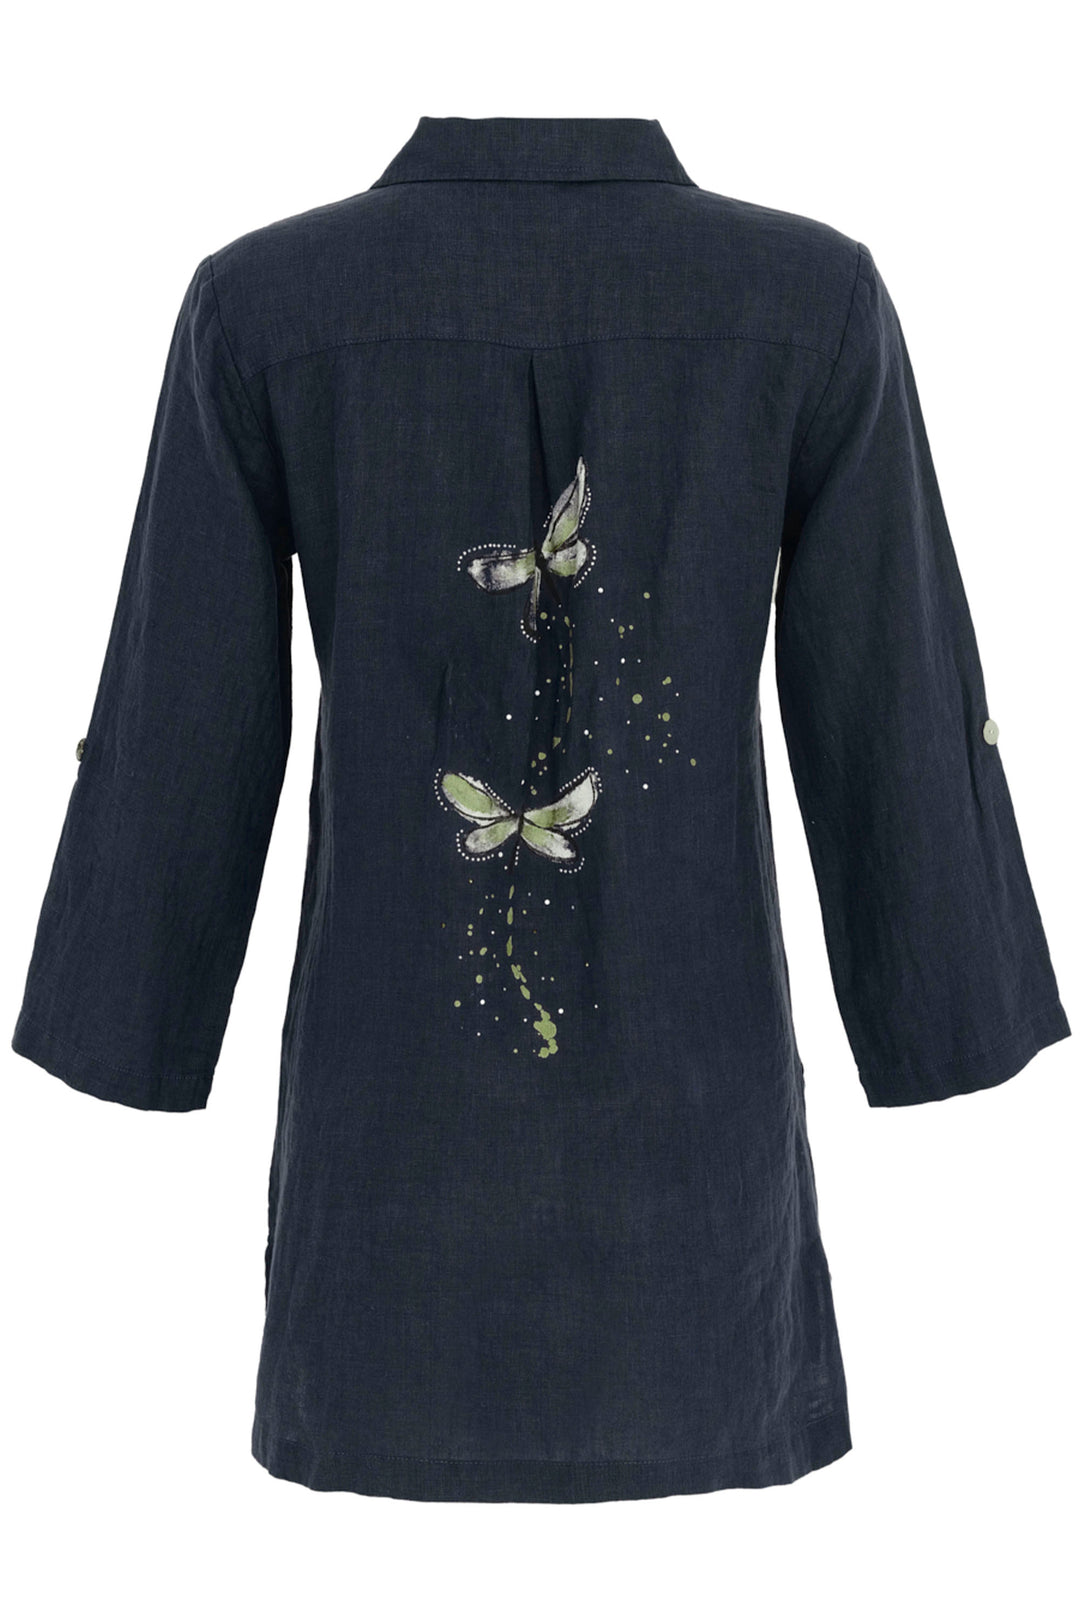 TUNIC SHIRT WITH DRAGONFLIES